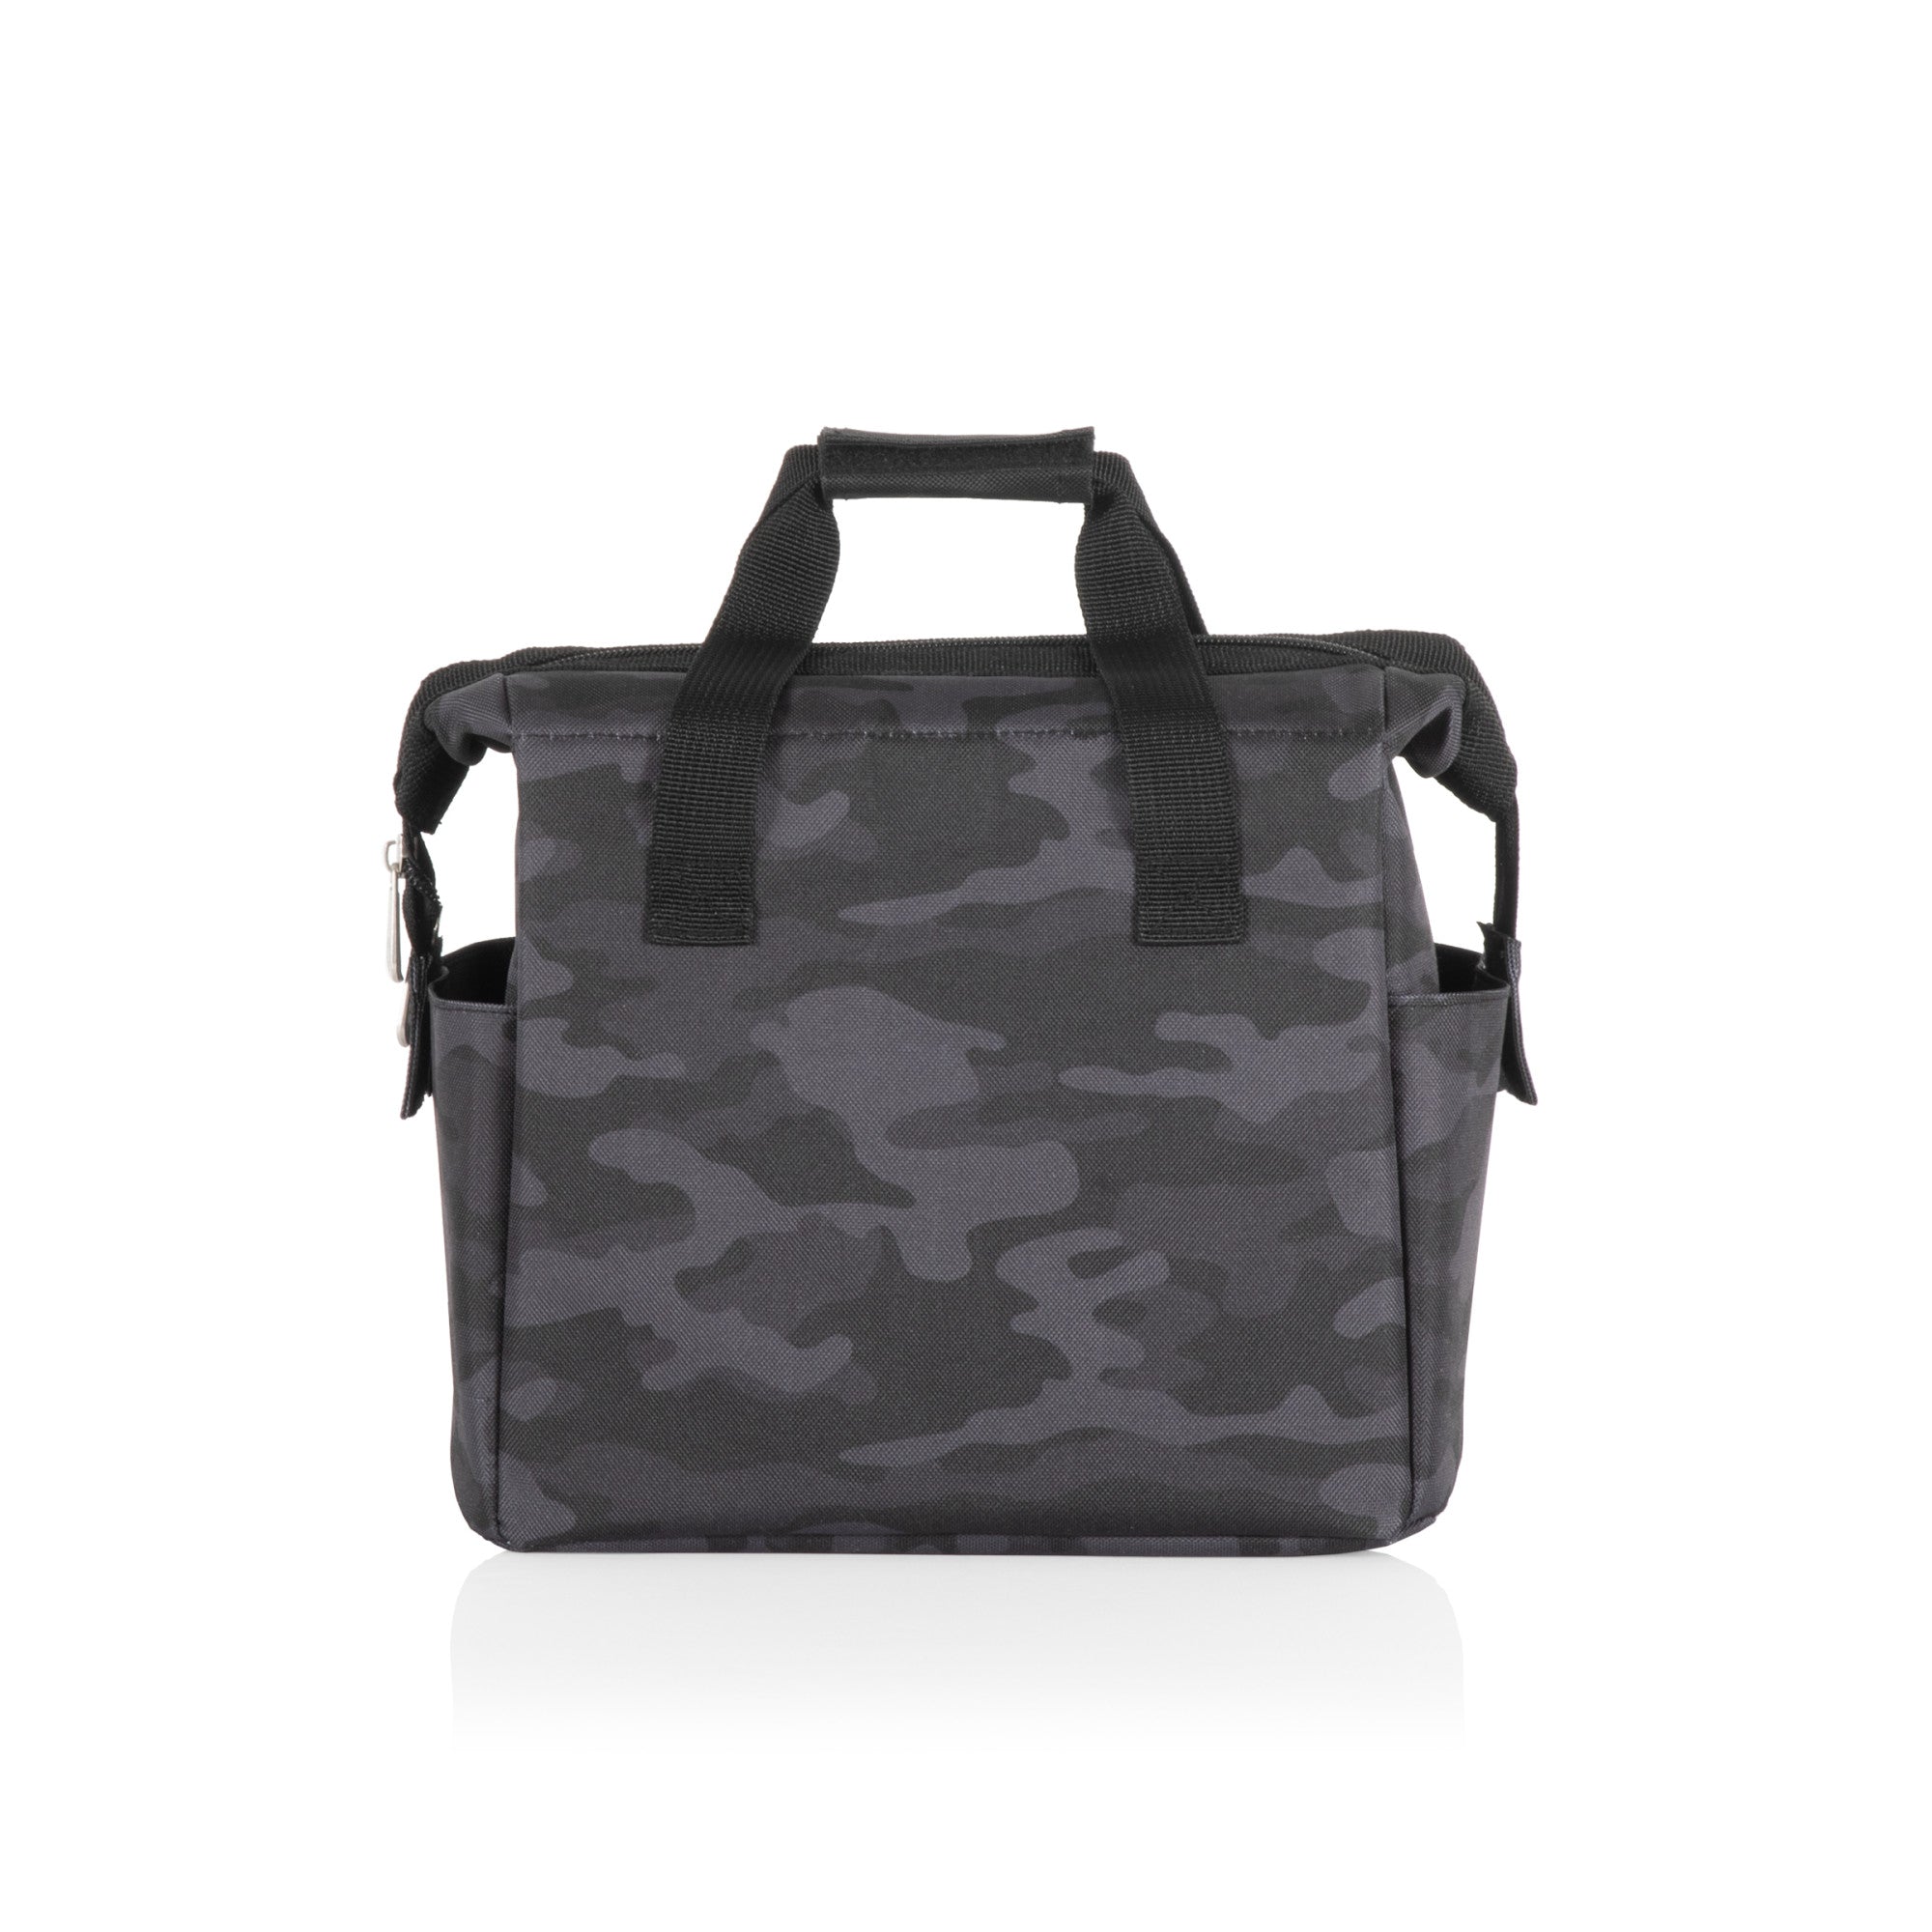 Star Wars Black Camo On The Go Lunch Cooler